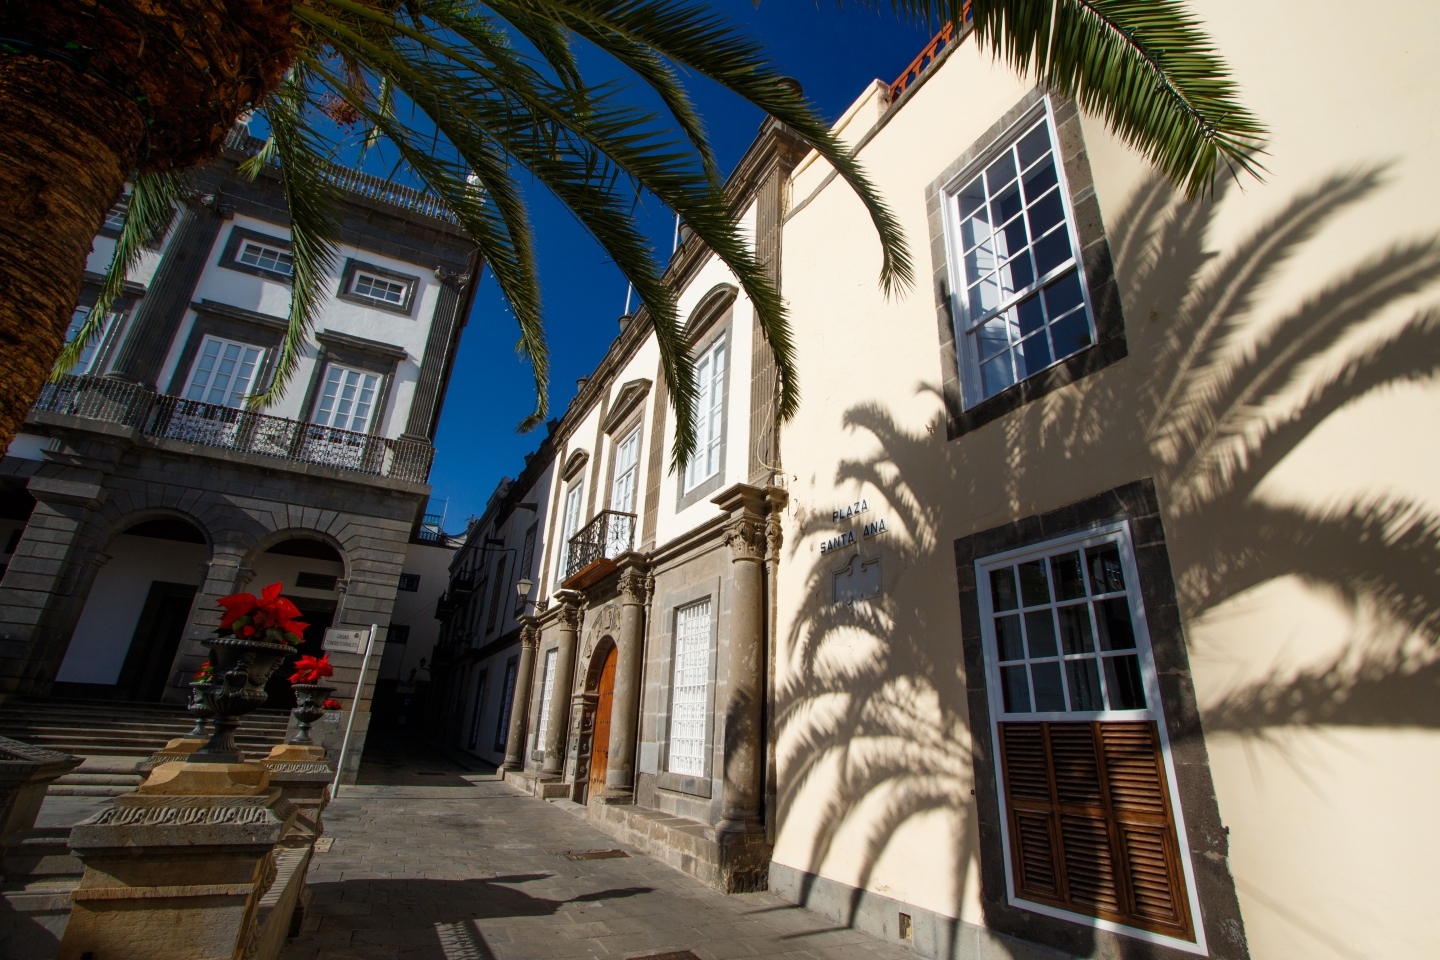 Vegueta old town in Gran Canaria is over 500 years old